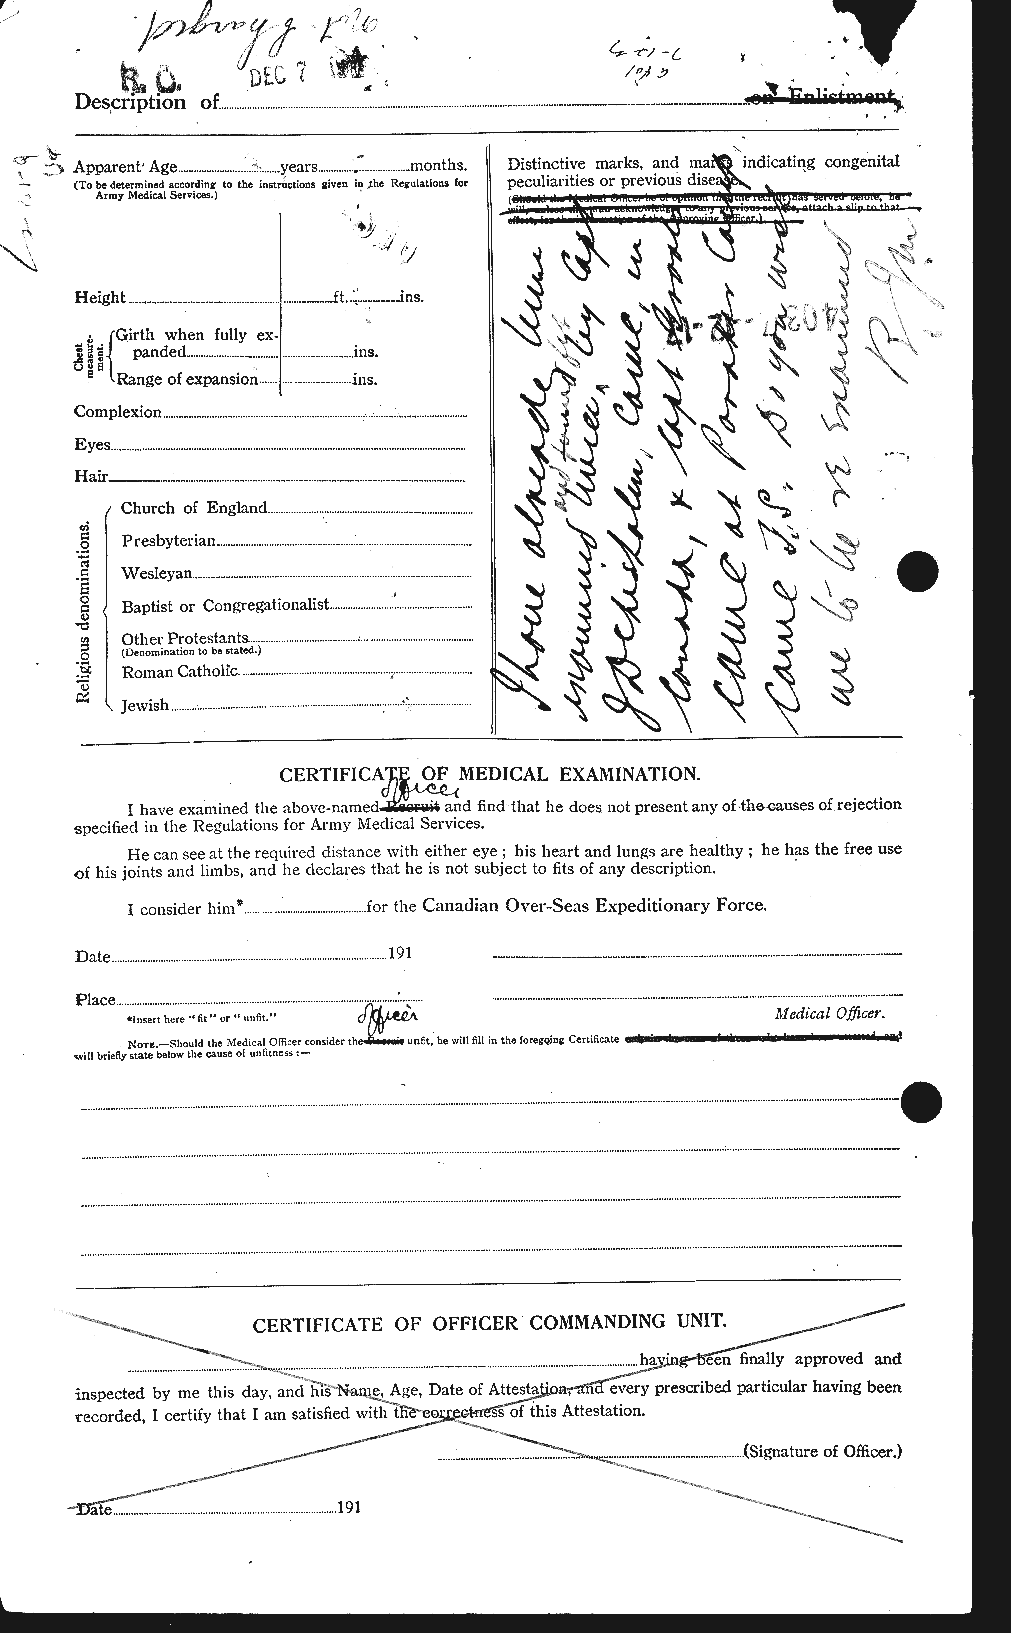 Personnel Records of the First World War - CEF 200452b